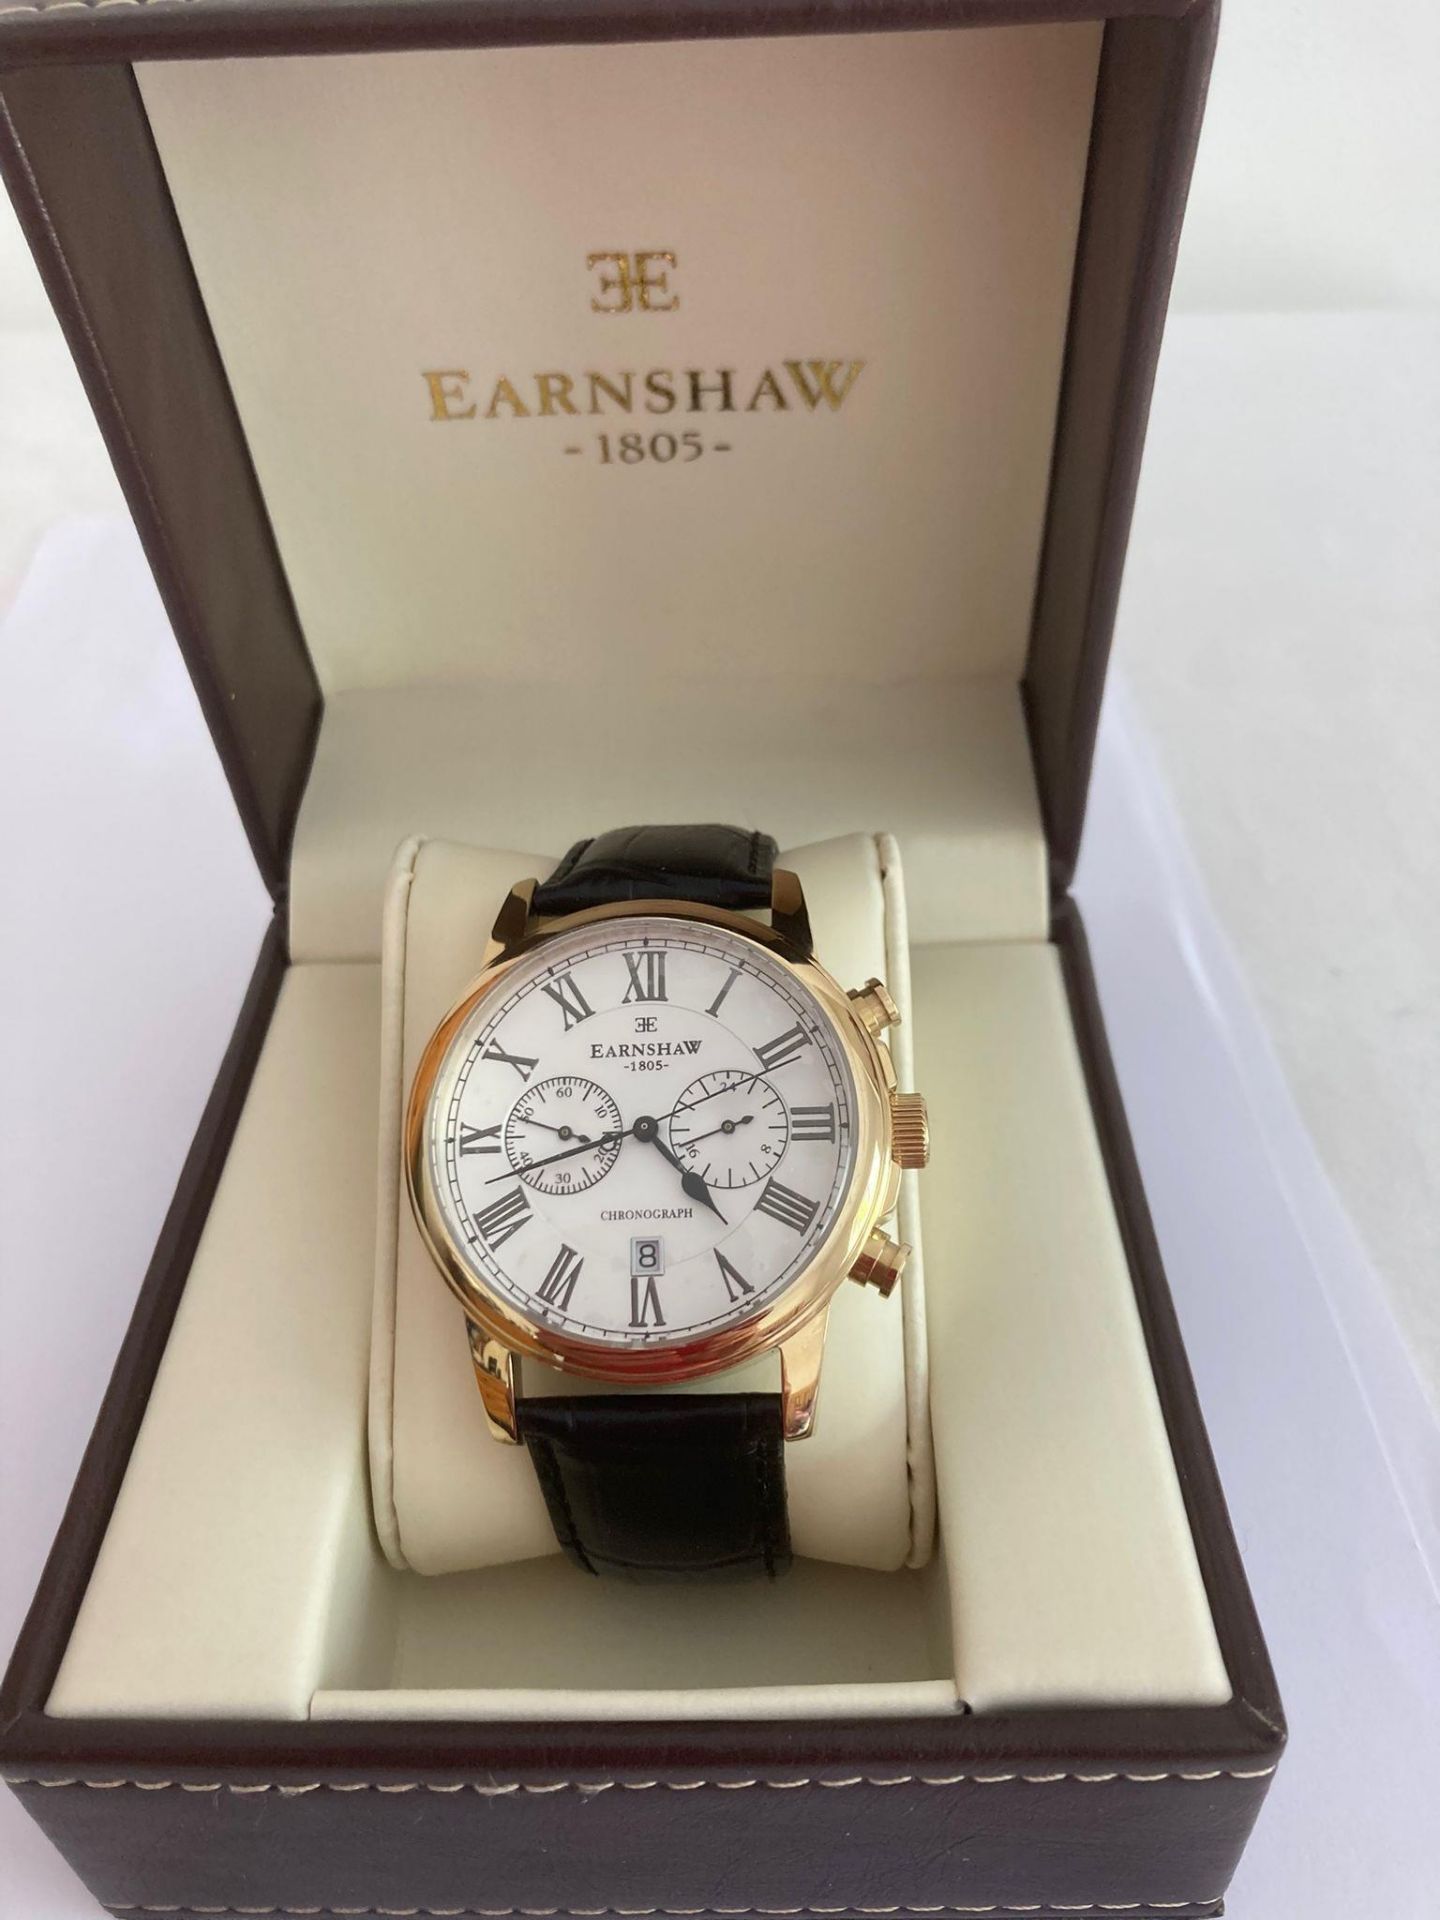 Gentleman's EARNSHAW QUARTZ CHRONOGRAPH Model WB120587. Finished in Gold Tone with multi dials. - Image 7 of 8